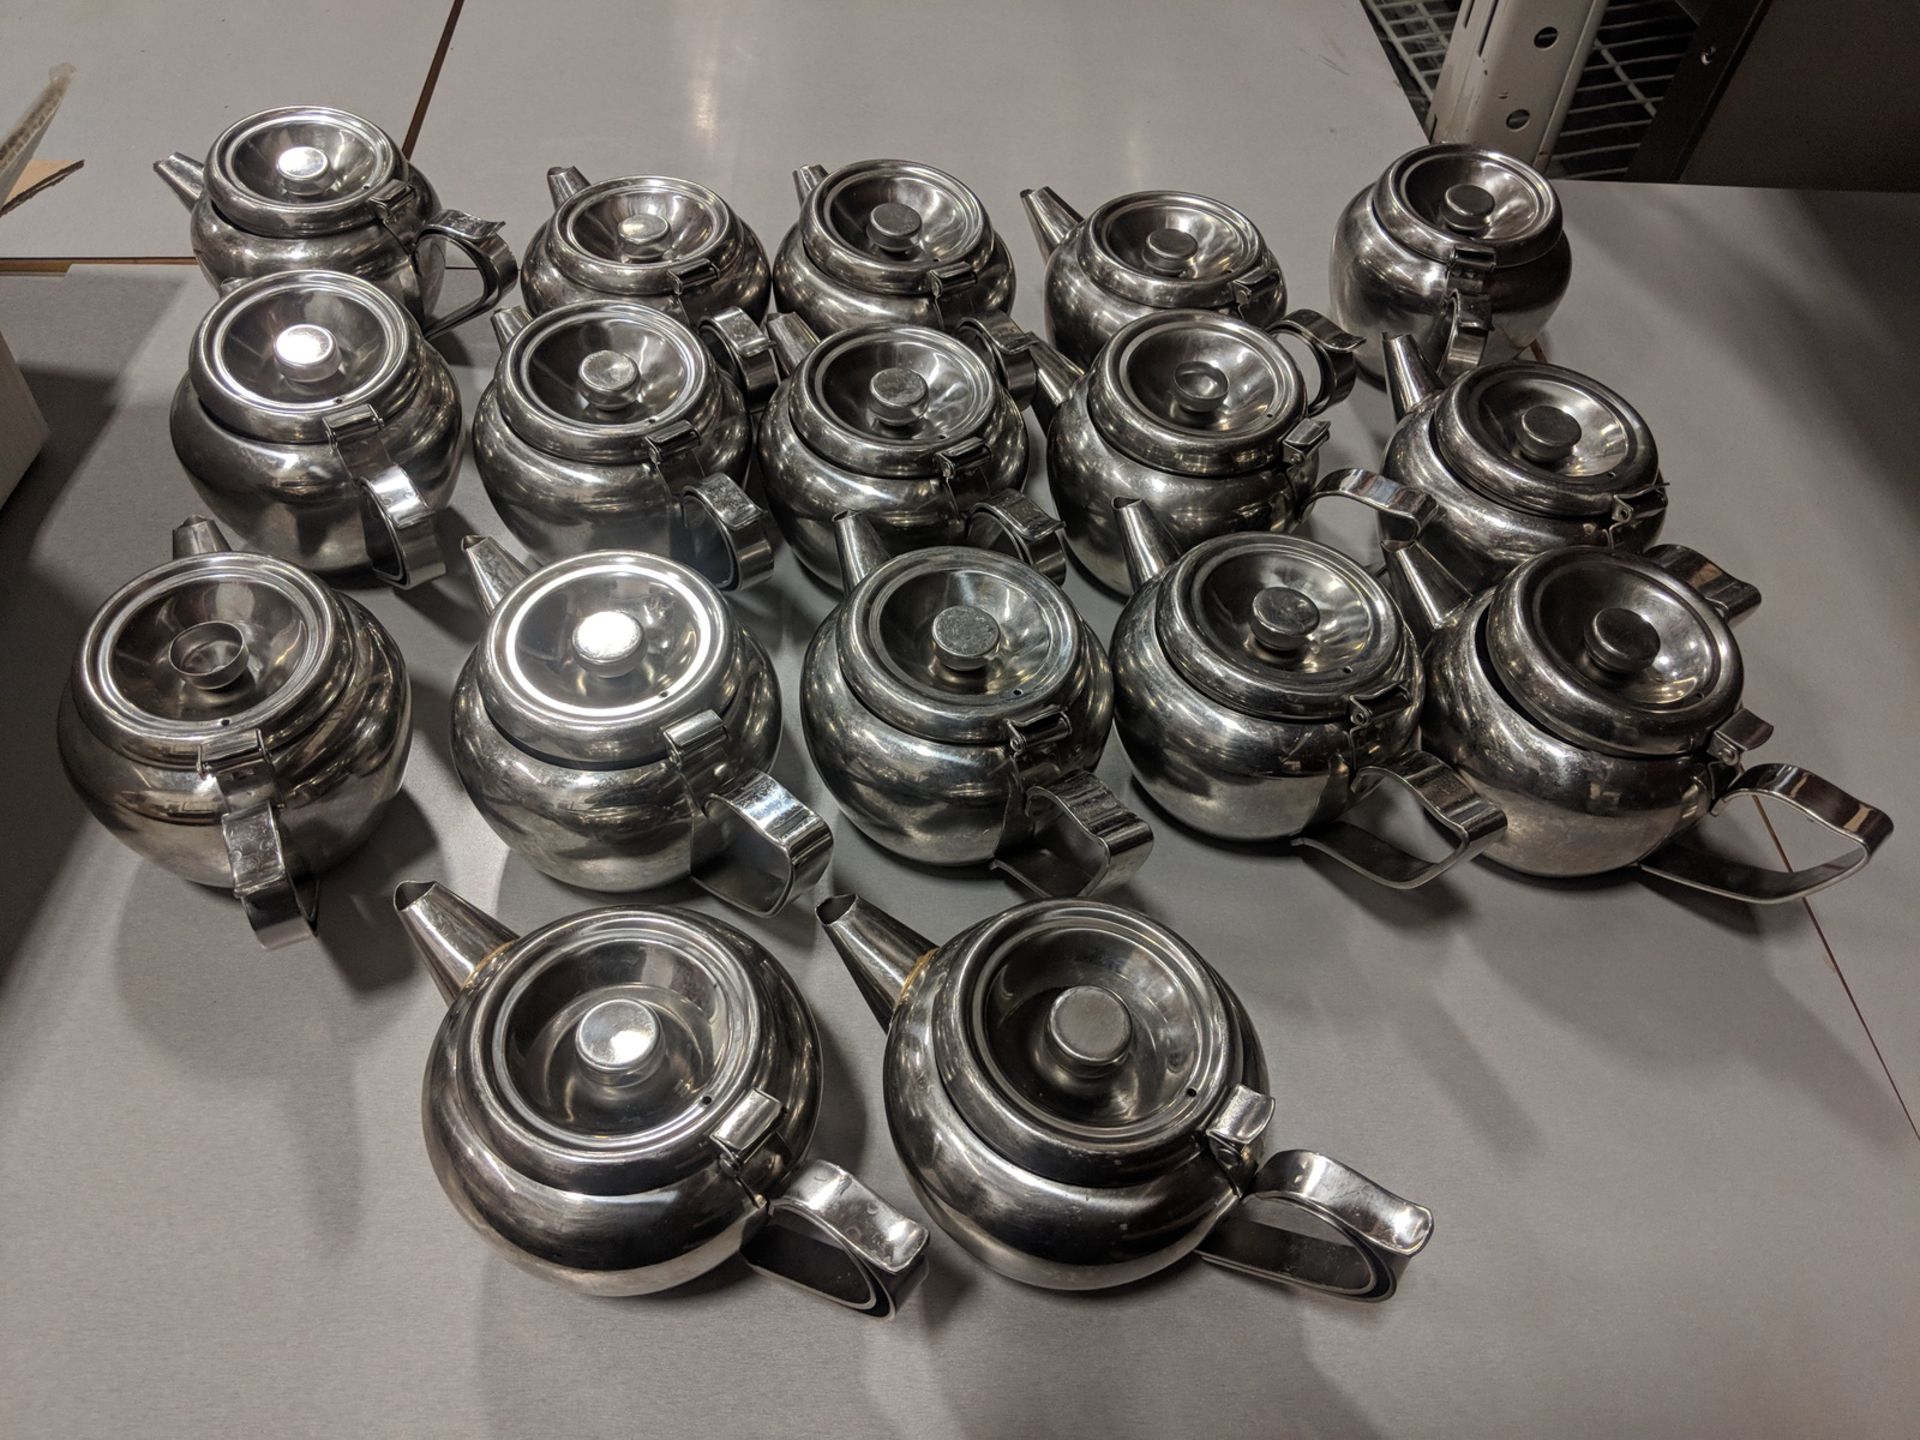 Stainless Teapots - Lot of 17